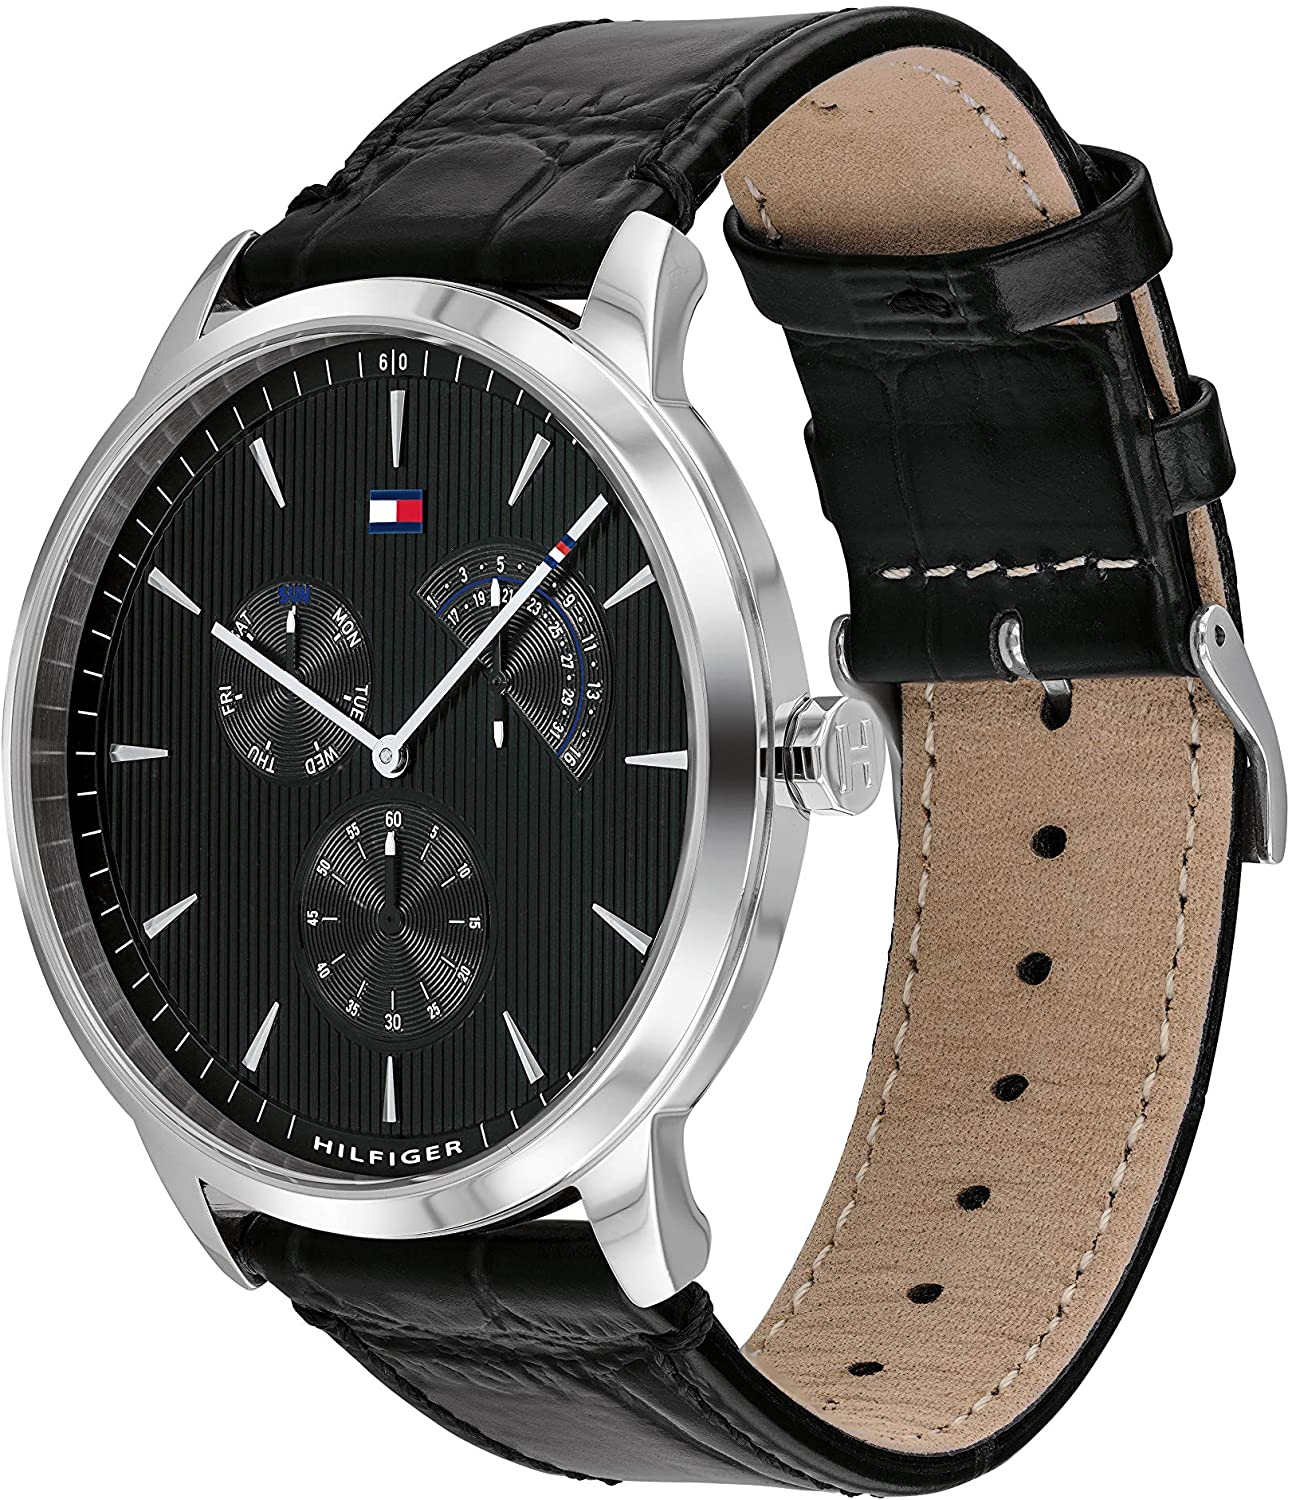 Tommy Hilfiger Men's Stainless Steel Quartz Watch with Leather Crocodile Strap, Black, 21.5 (Model: 1710391)